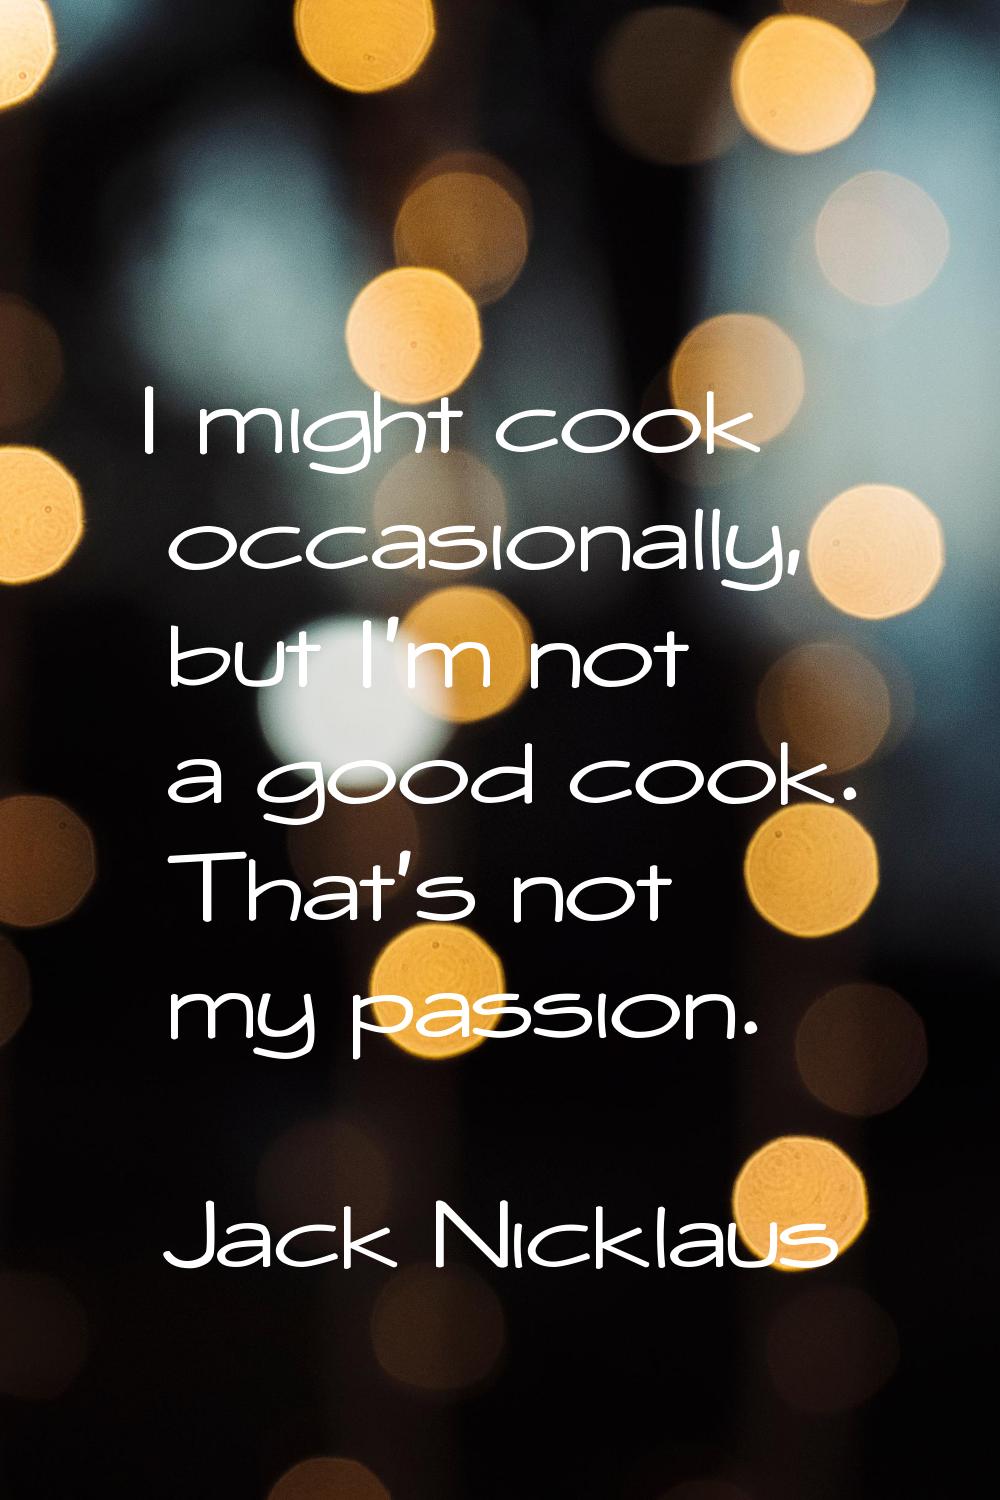 I might cook occasionally, but I'm not a good cook. That's not my passion.